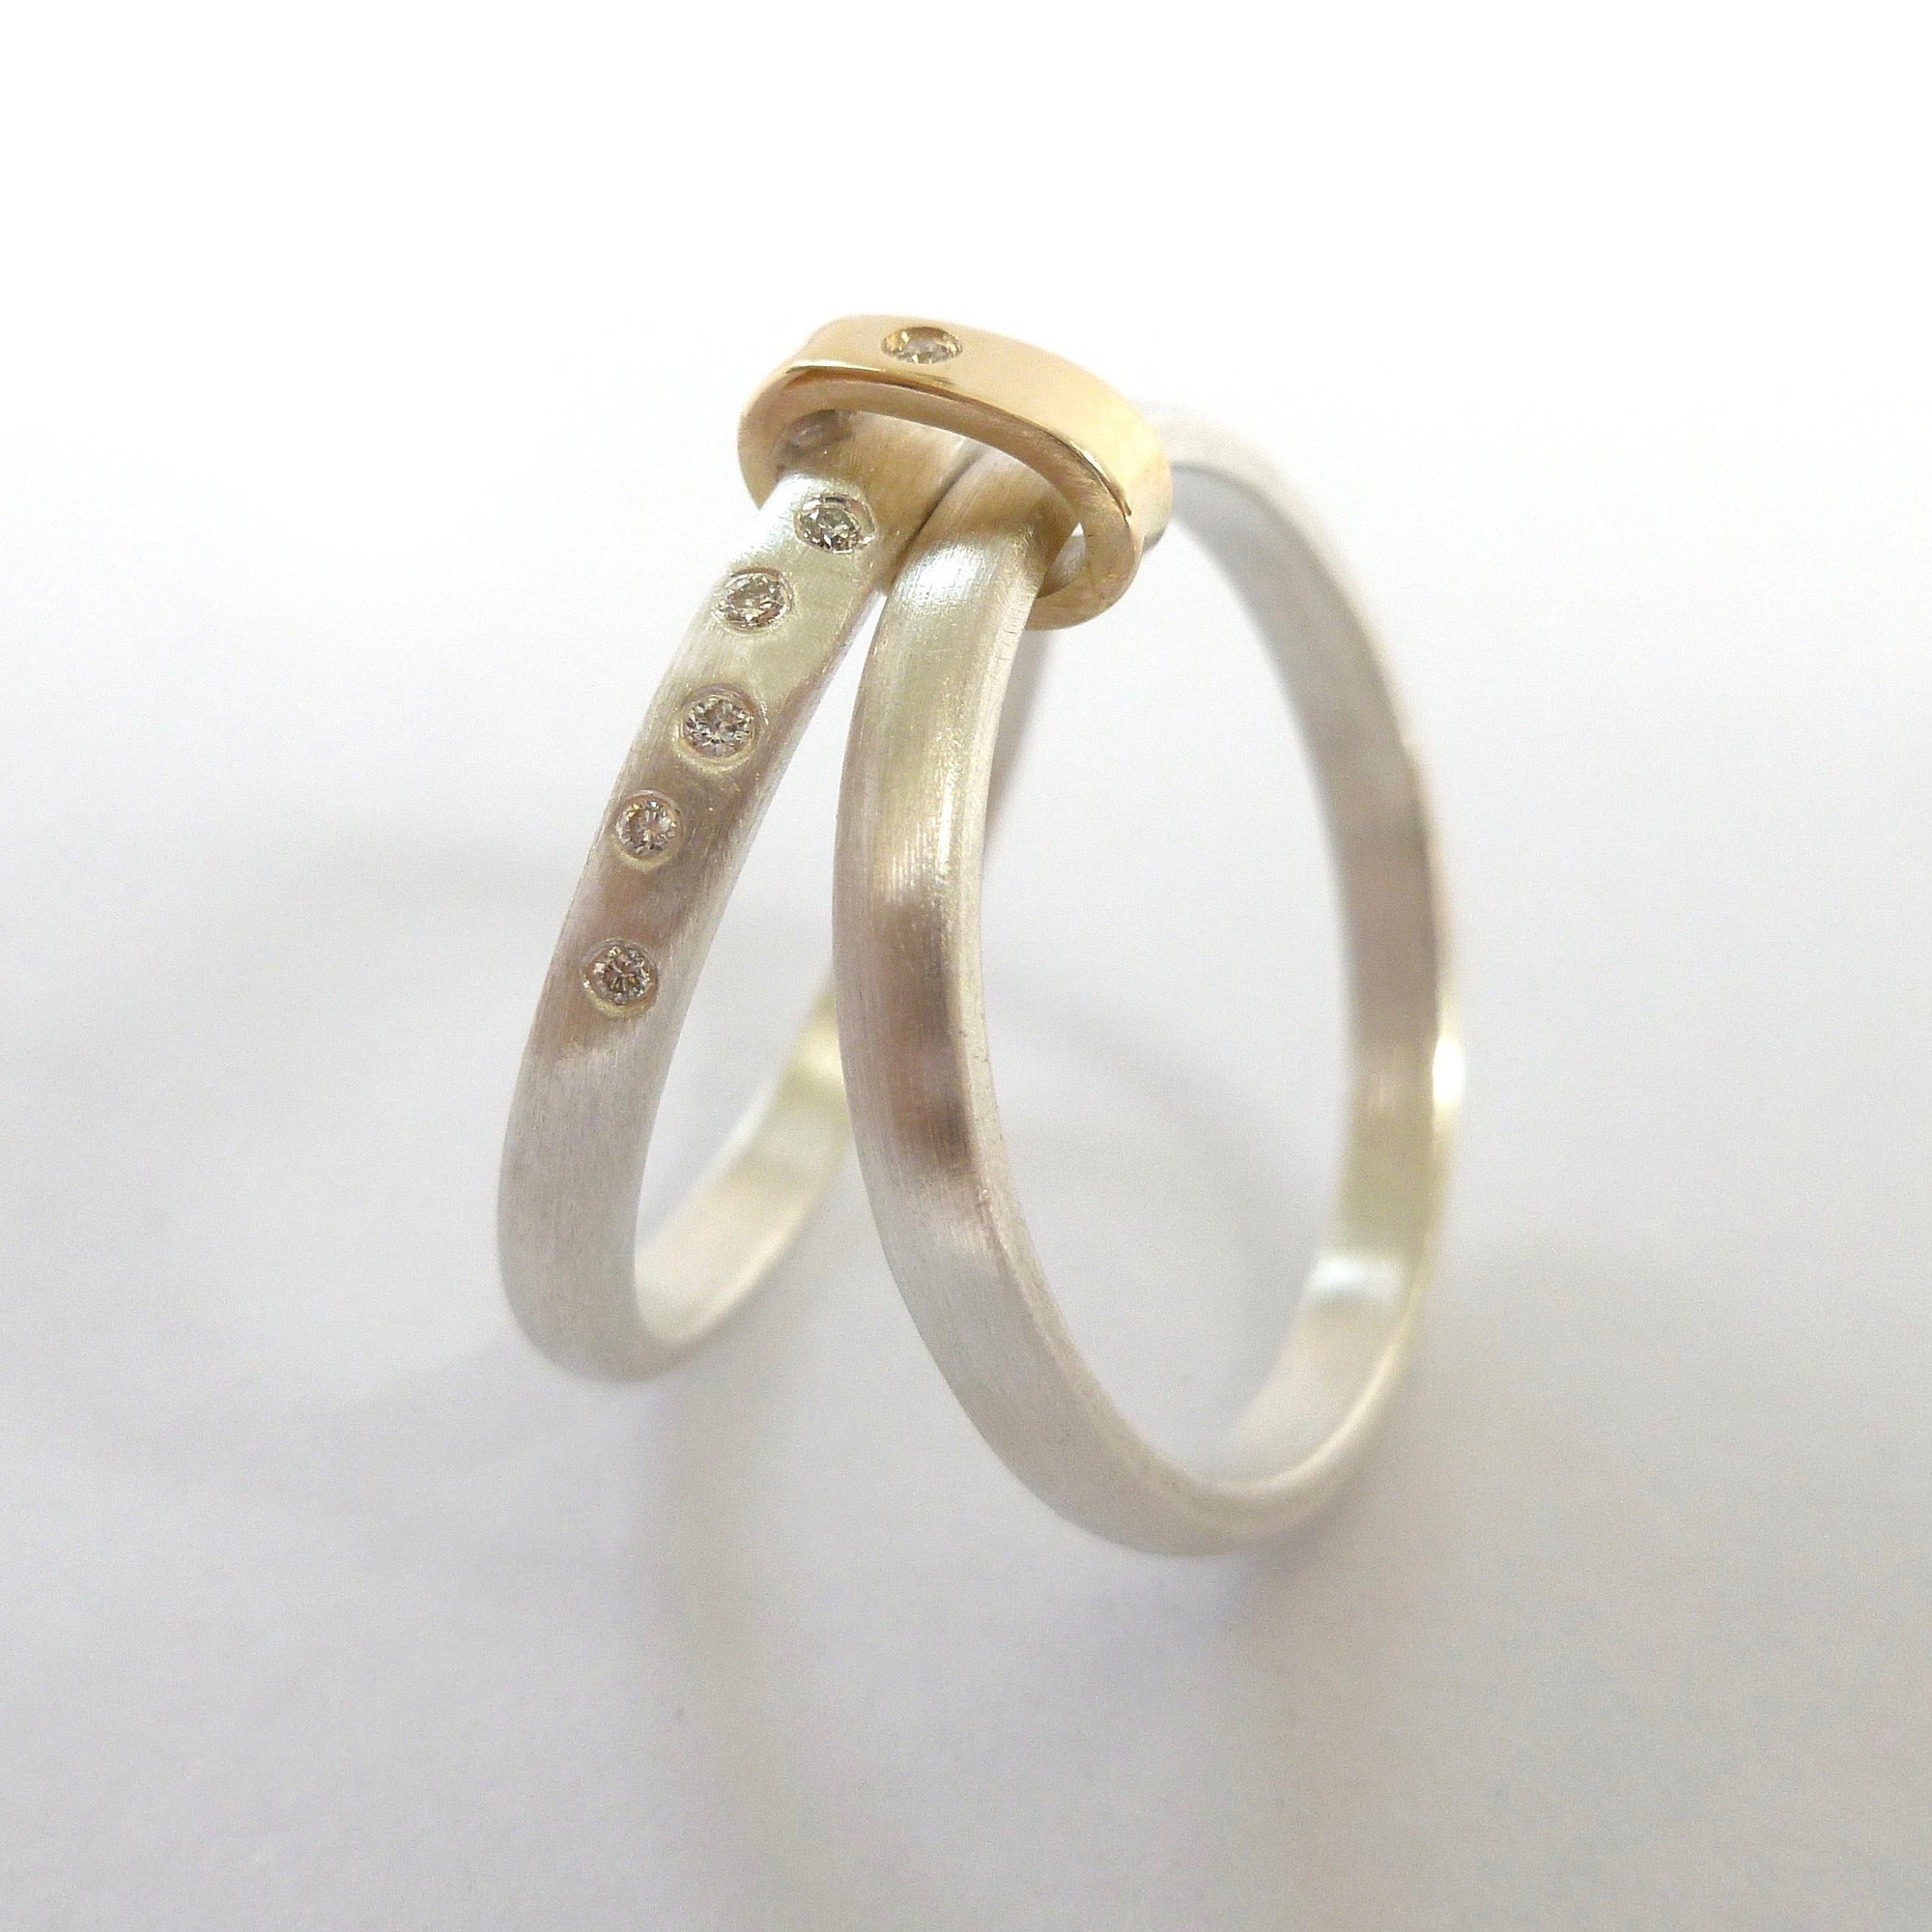 Two band silver and diamond ring - size N